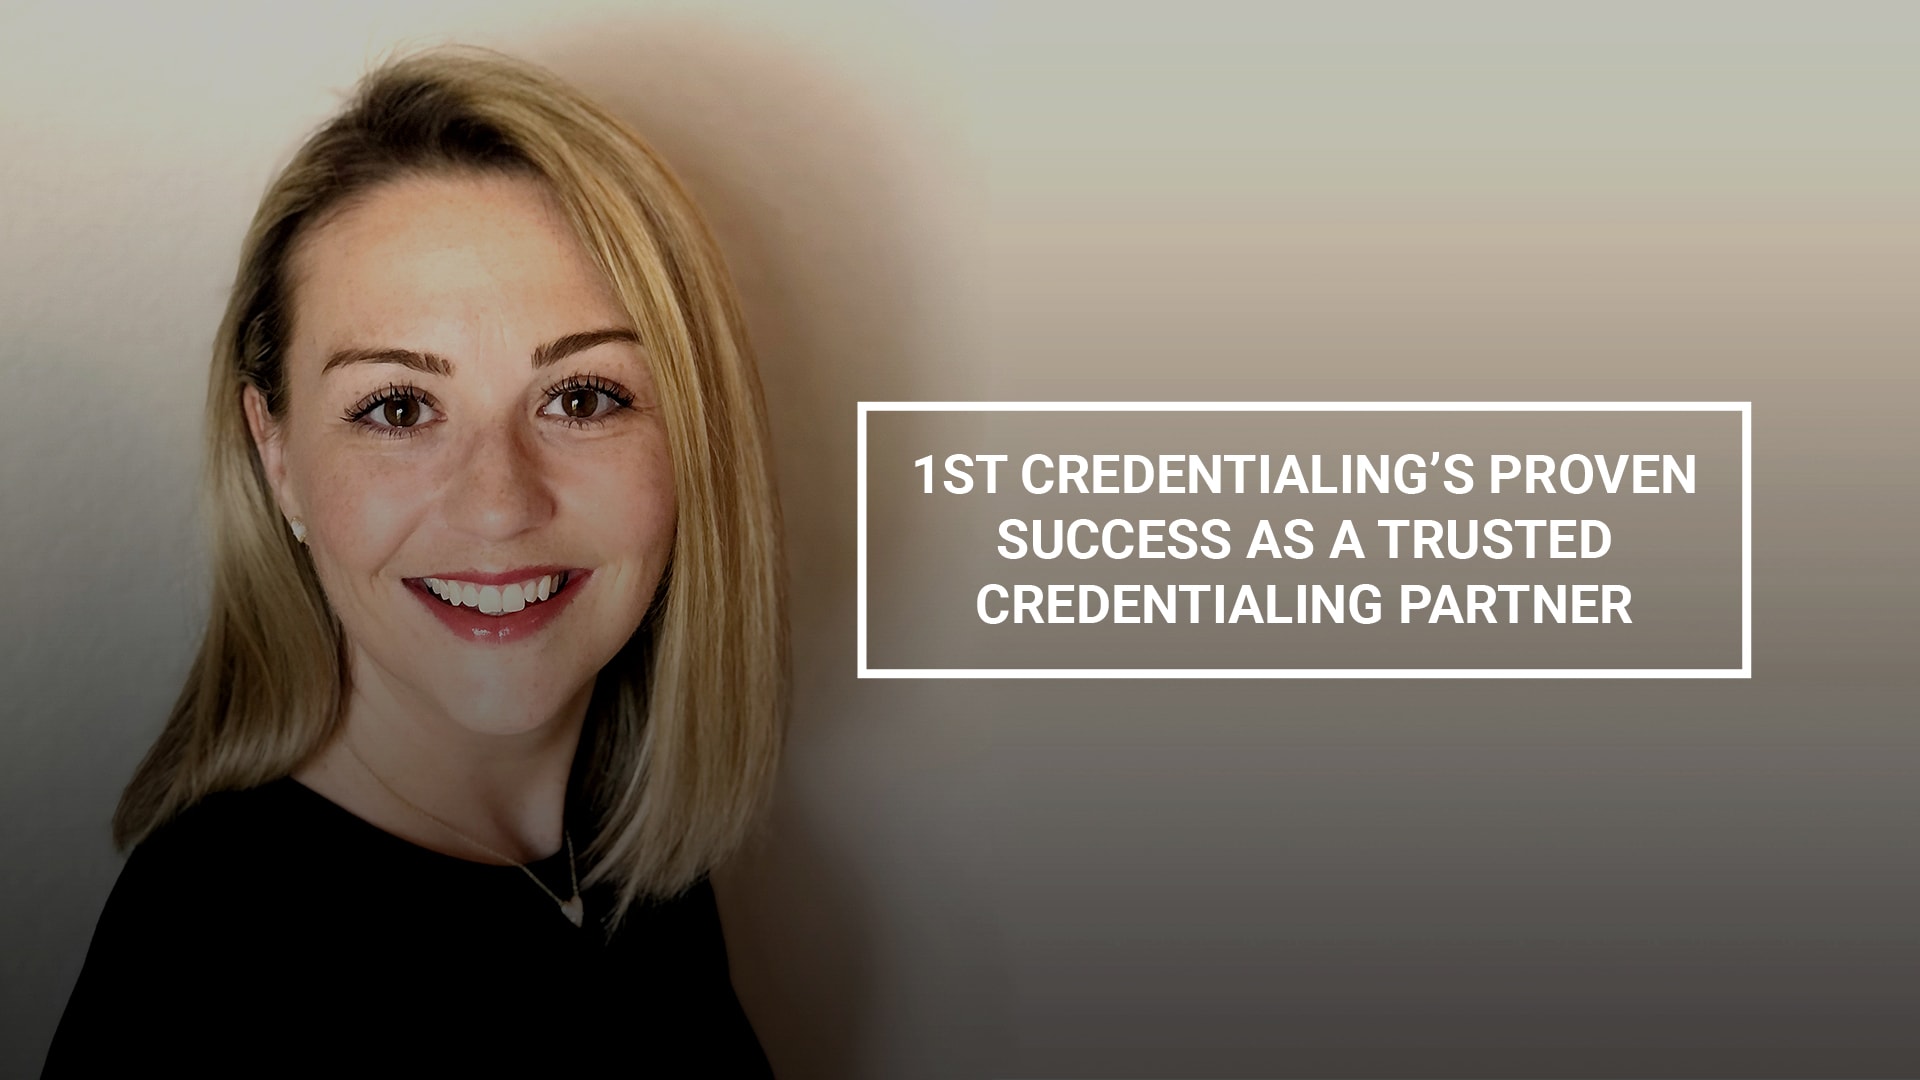 1st Credentialing's Proven Success as a Trusted Credentialing Partner